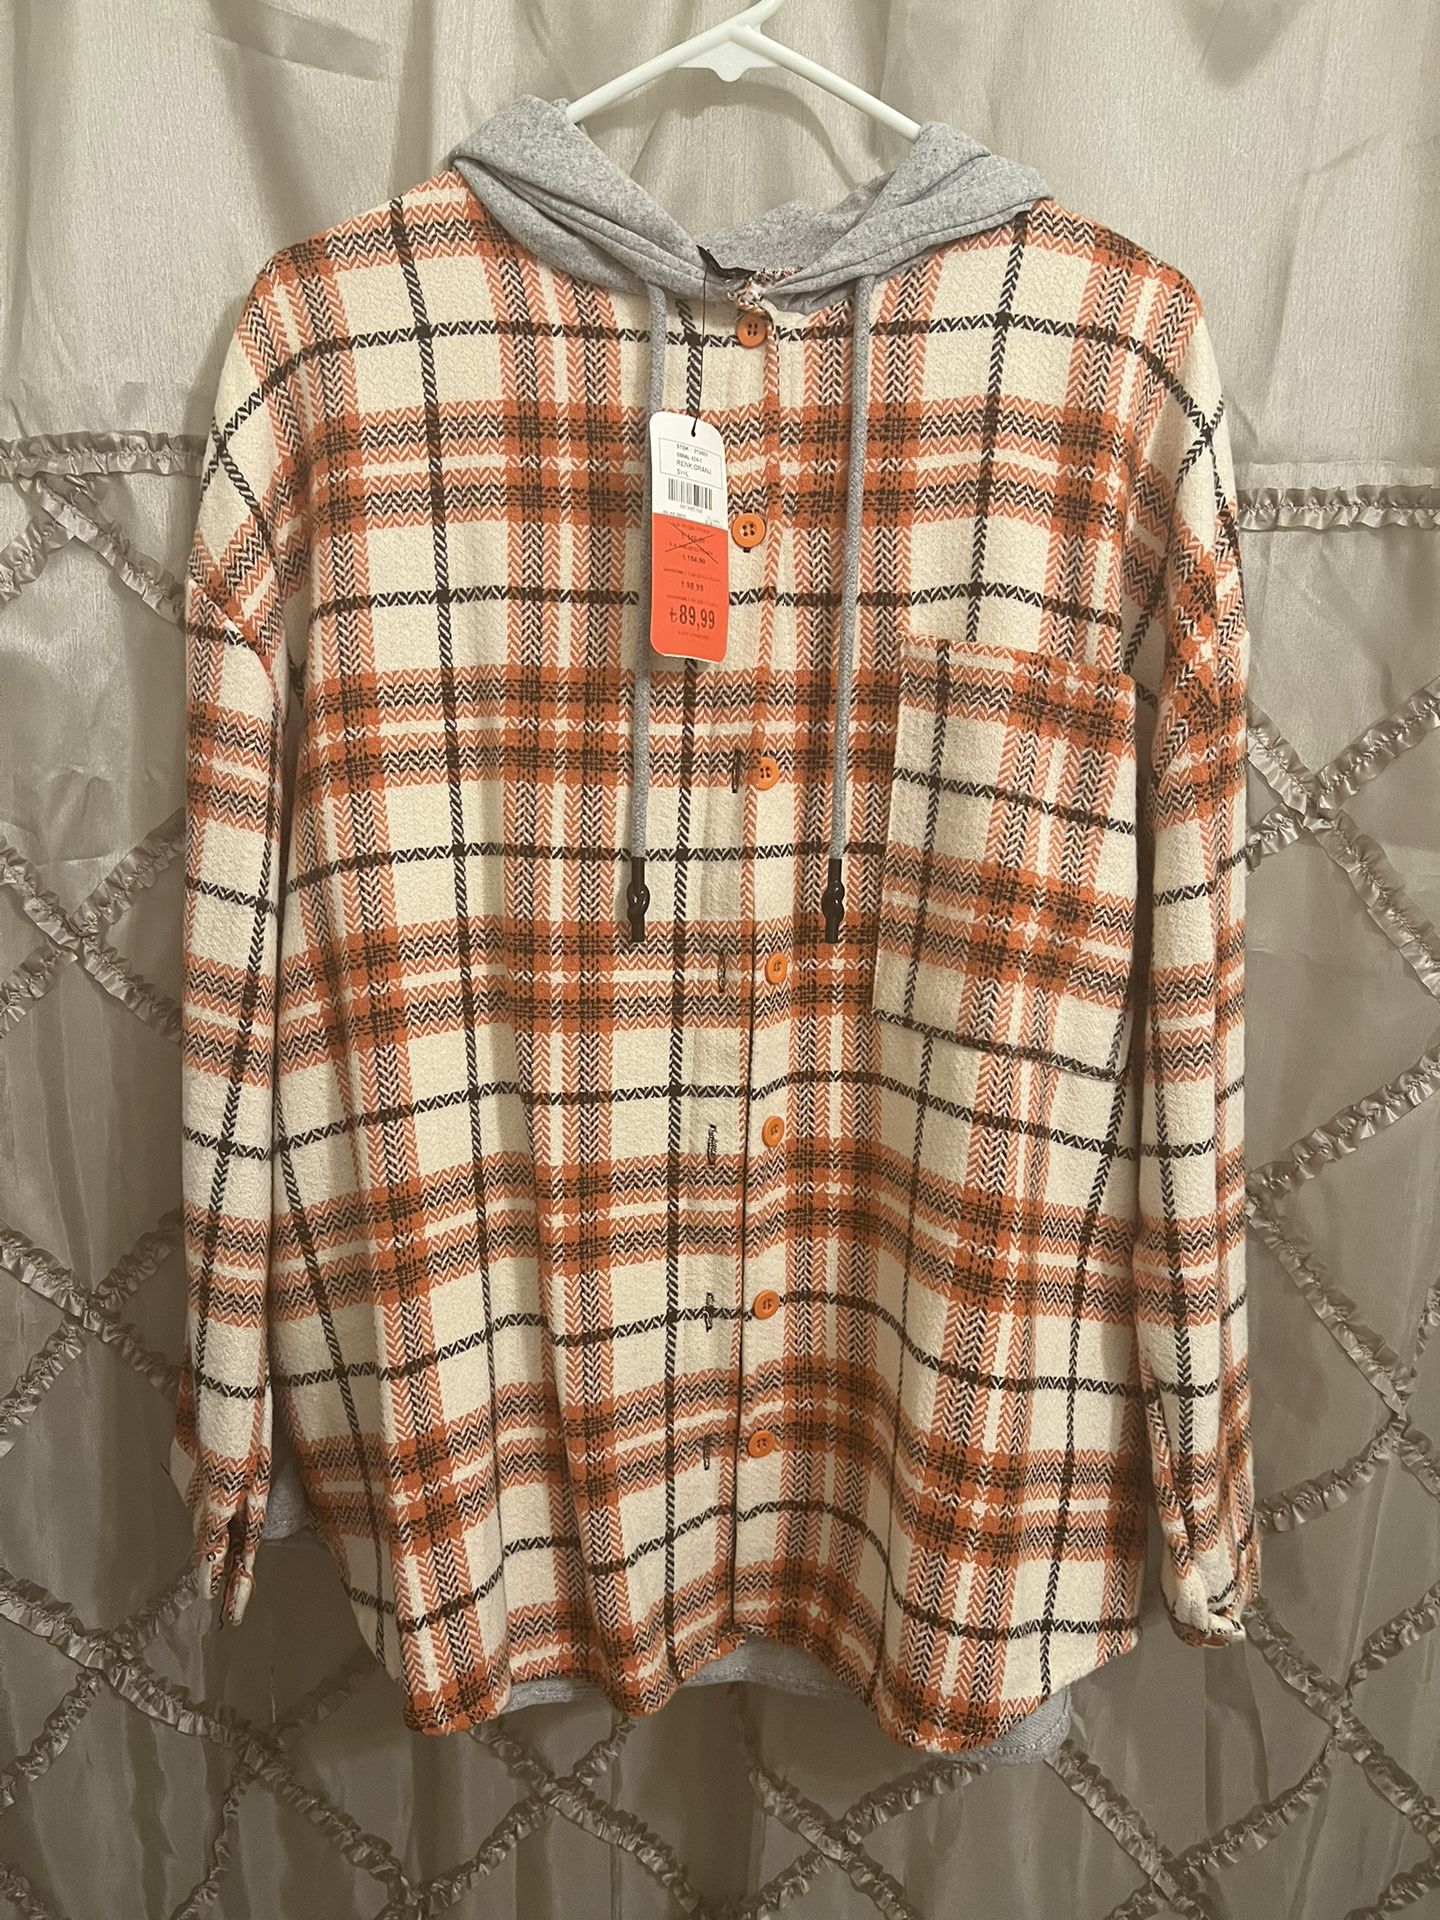 Virgin Wool Plaid Fitted Flannel Shirt Women's Size L 